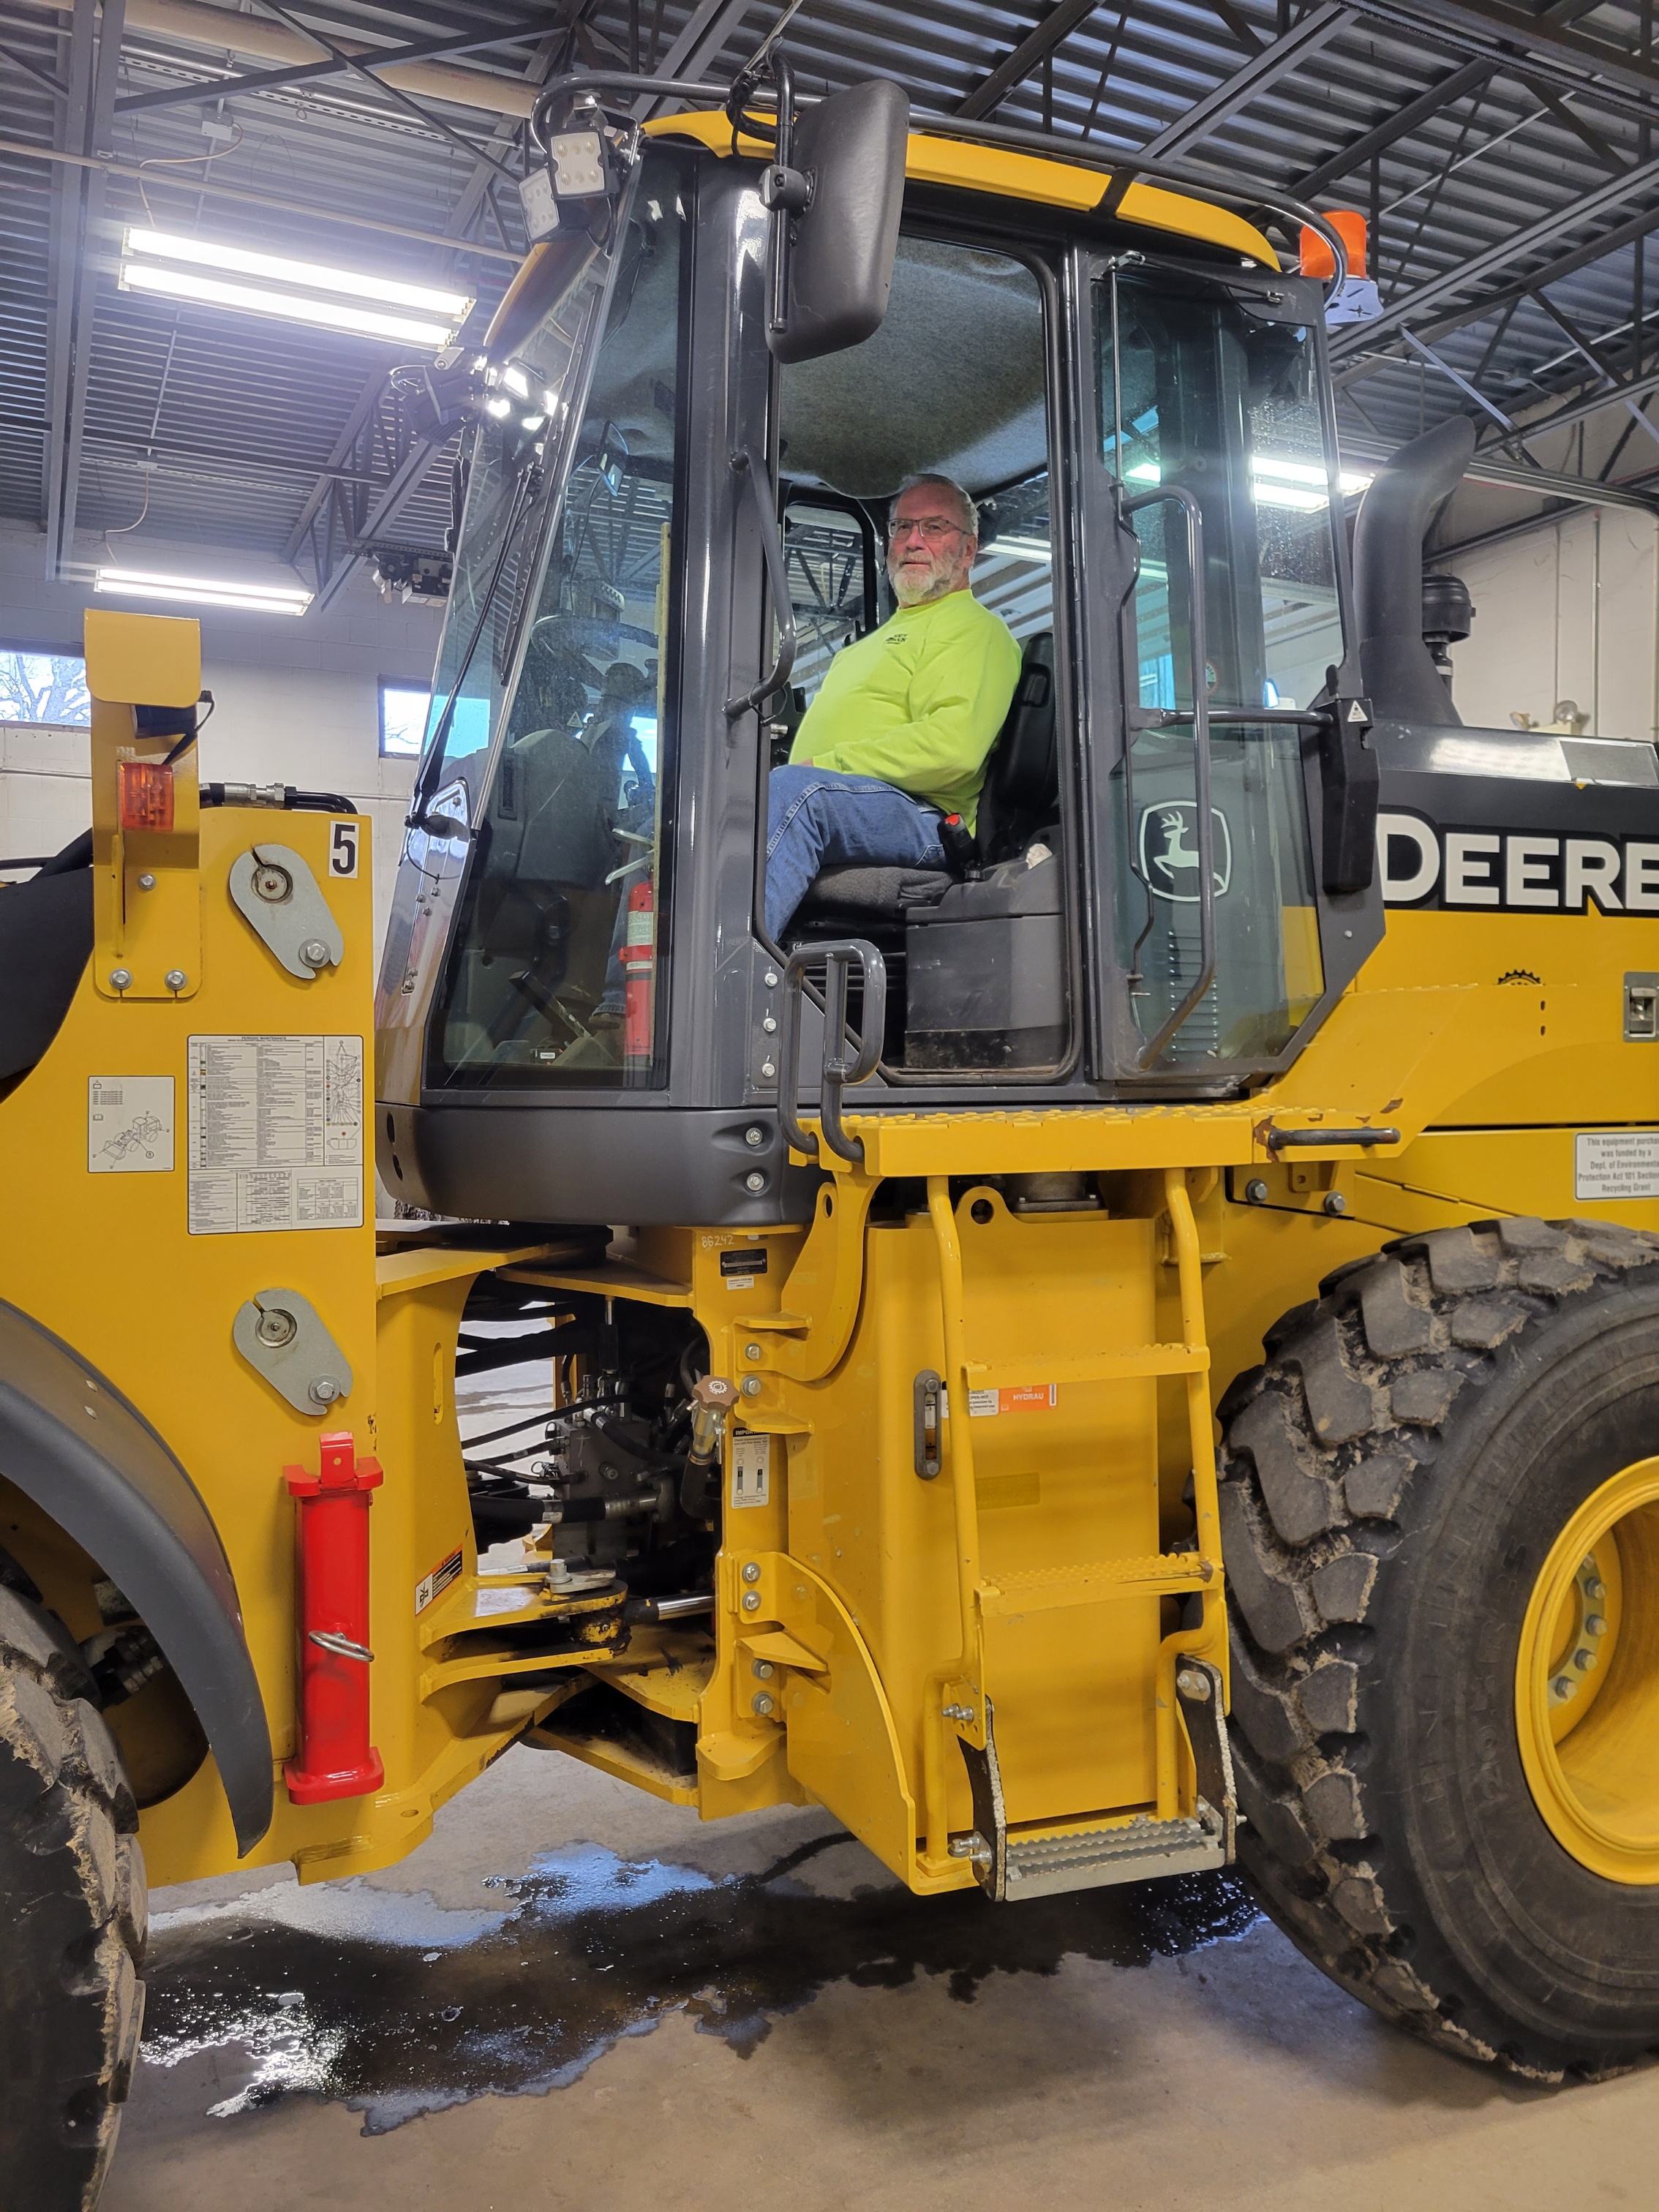 Ed Brensinger sits in a piece of heavy equipment